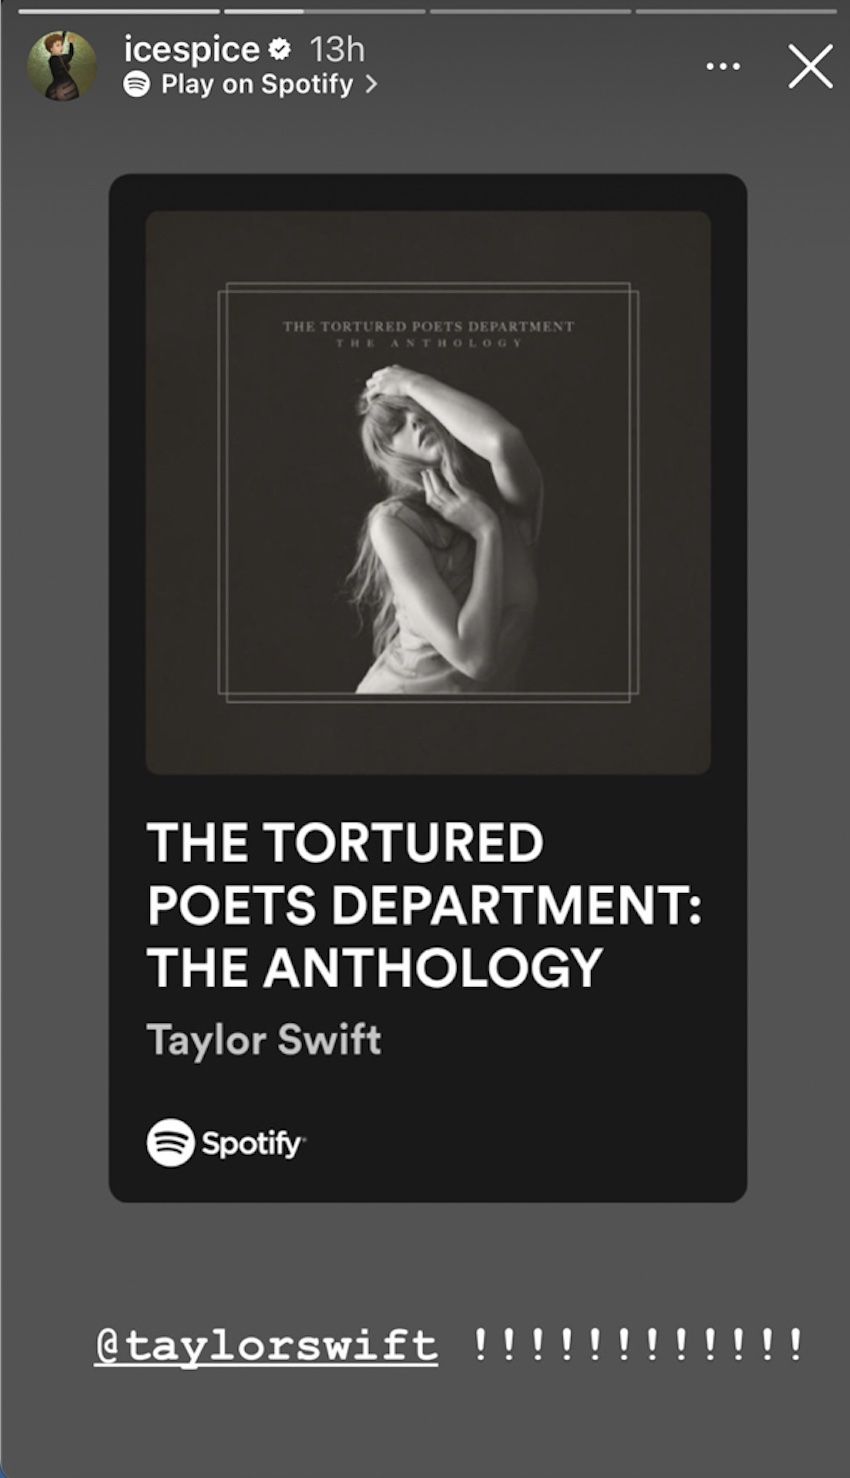 ice spice sharing a story of taylor swifts new album the tortured poets department